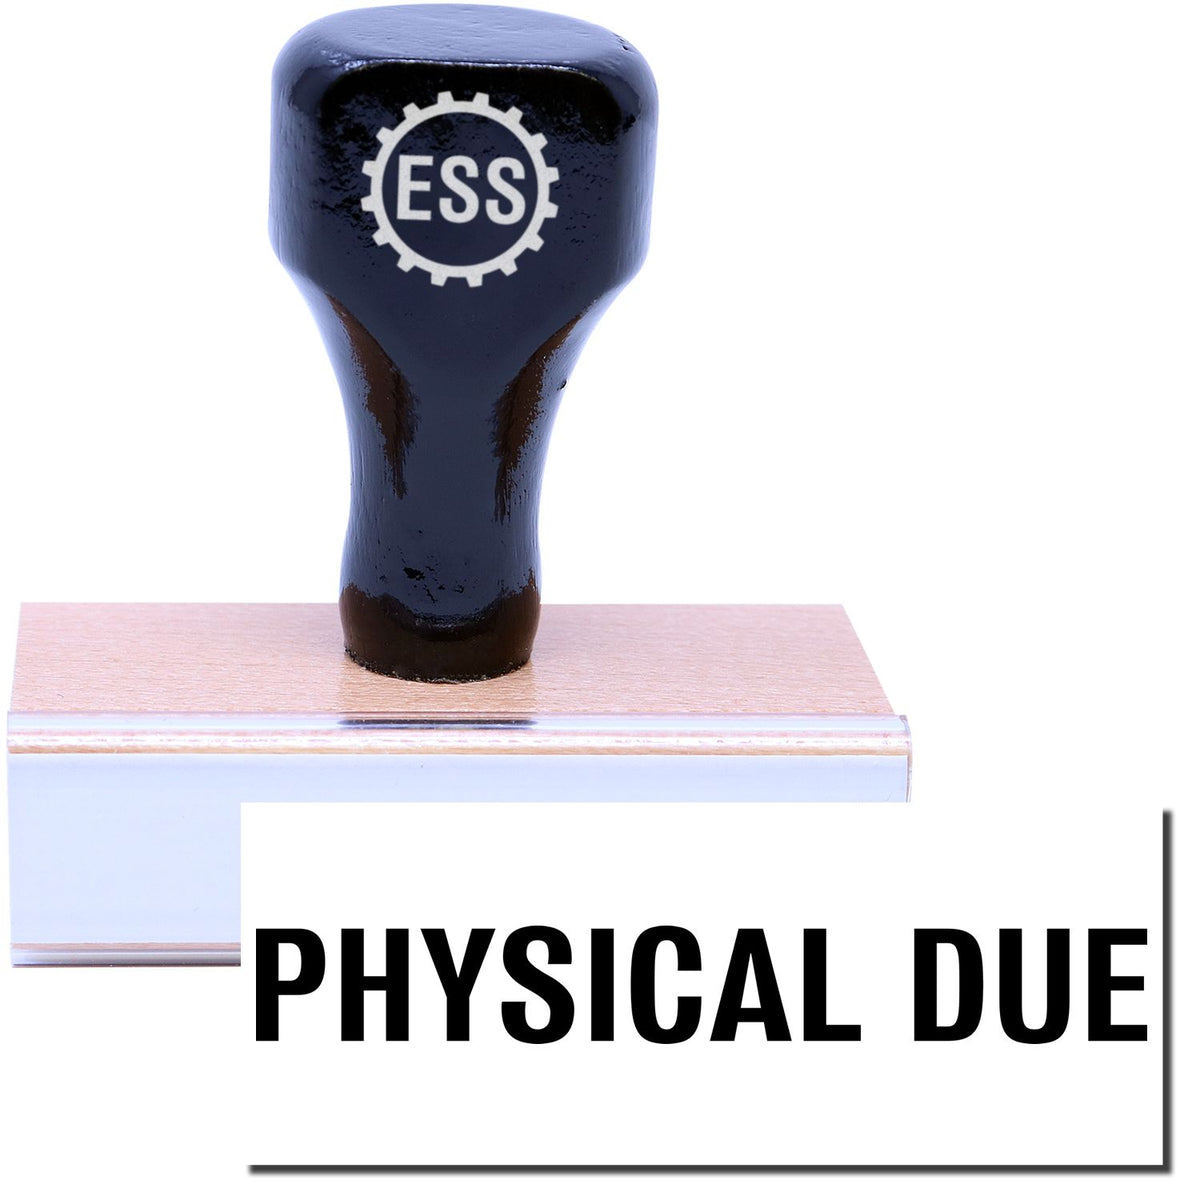 A stock office rubber stamp with a stamped image showing how the text &quot;PHYSICAL DUE&quot; in a large bold font is displayed after stamping.